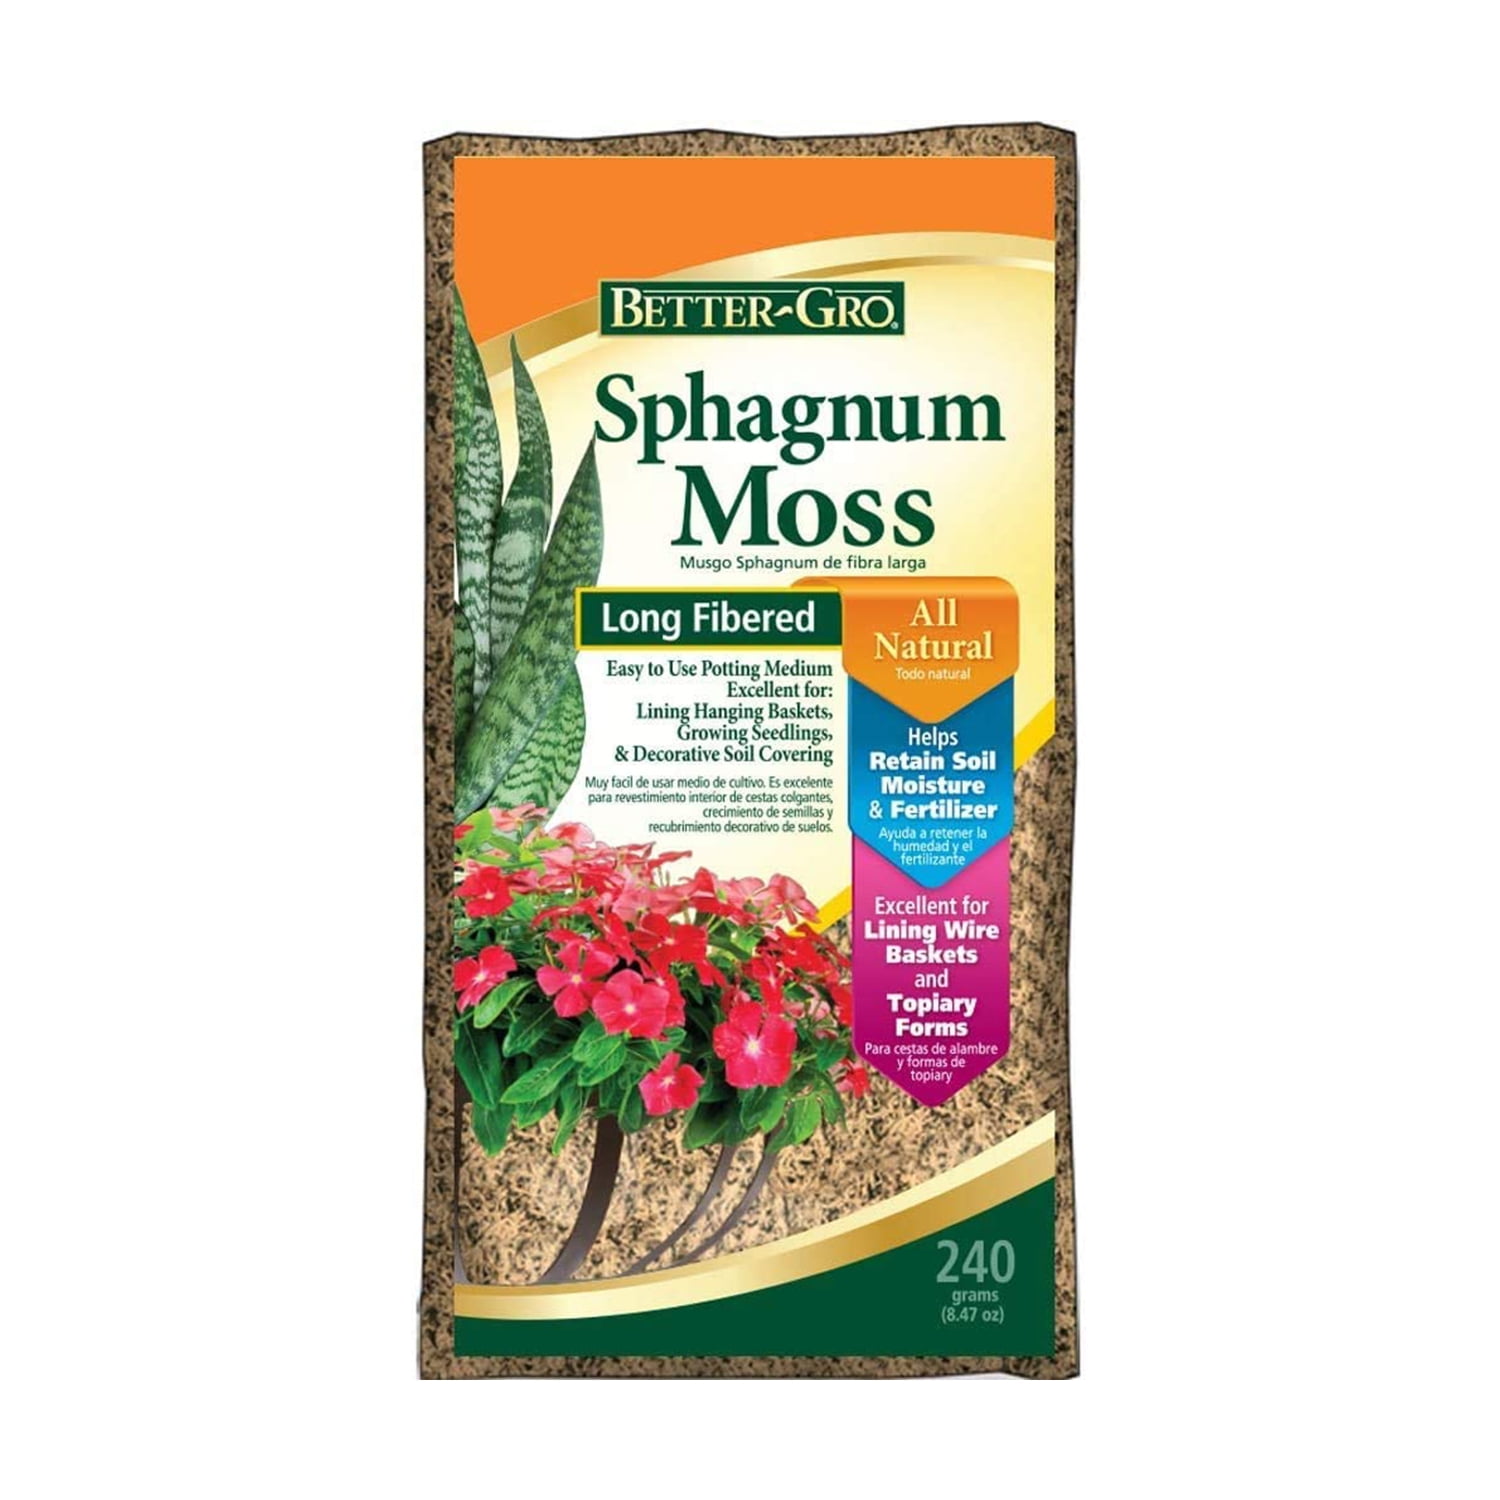  Better-Gro 50450 Premium Grade Moss-100% Natural for Orchids,  Ferns, and Hostas, Excellent for Hanging Baskets and Propagating Plants  Sphagnum Moss, 190 cu. in, Tan : Soil And Soil Amendments 